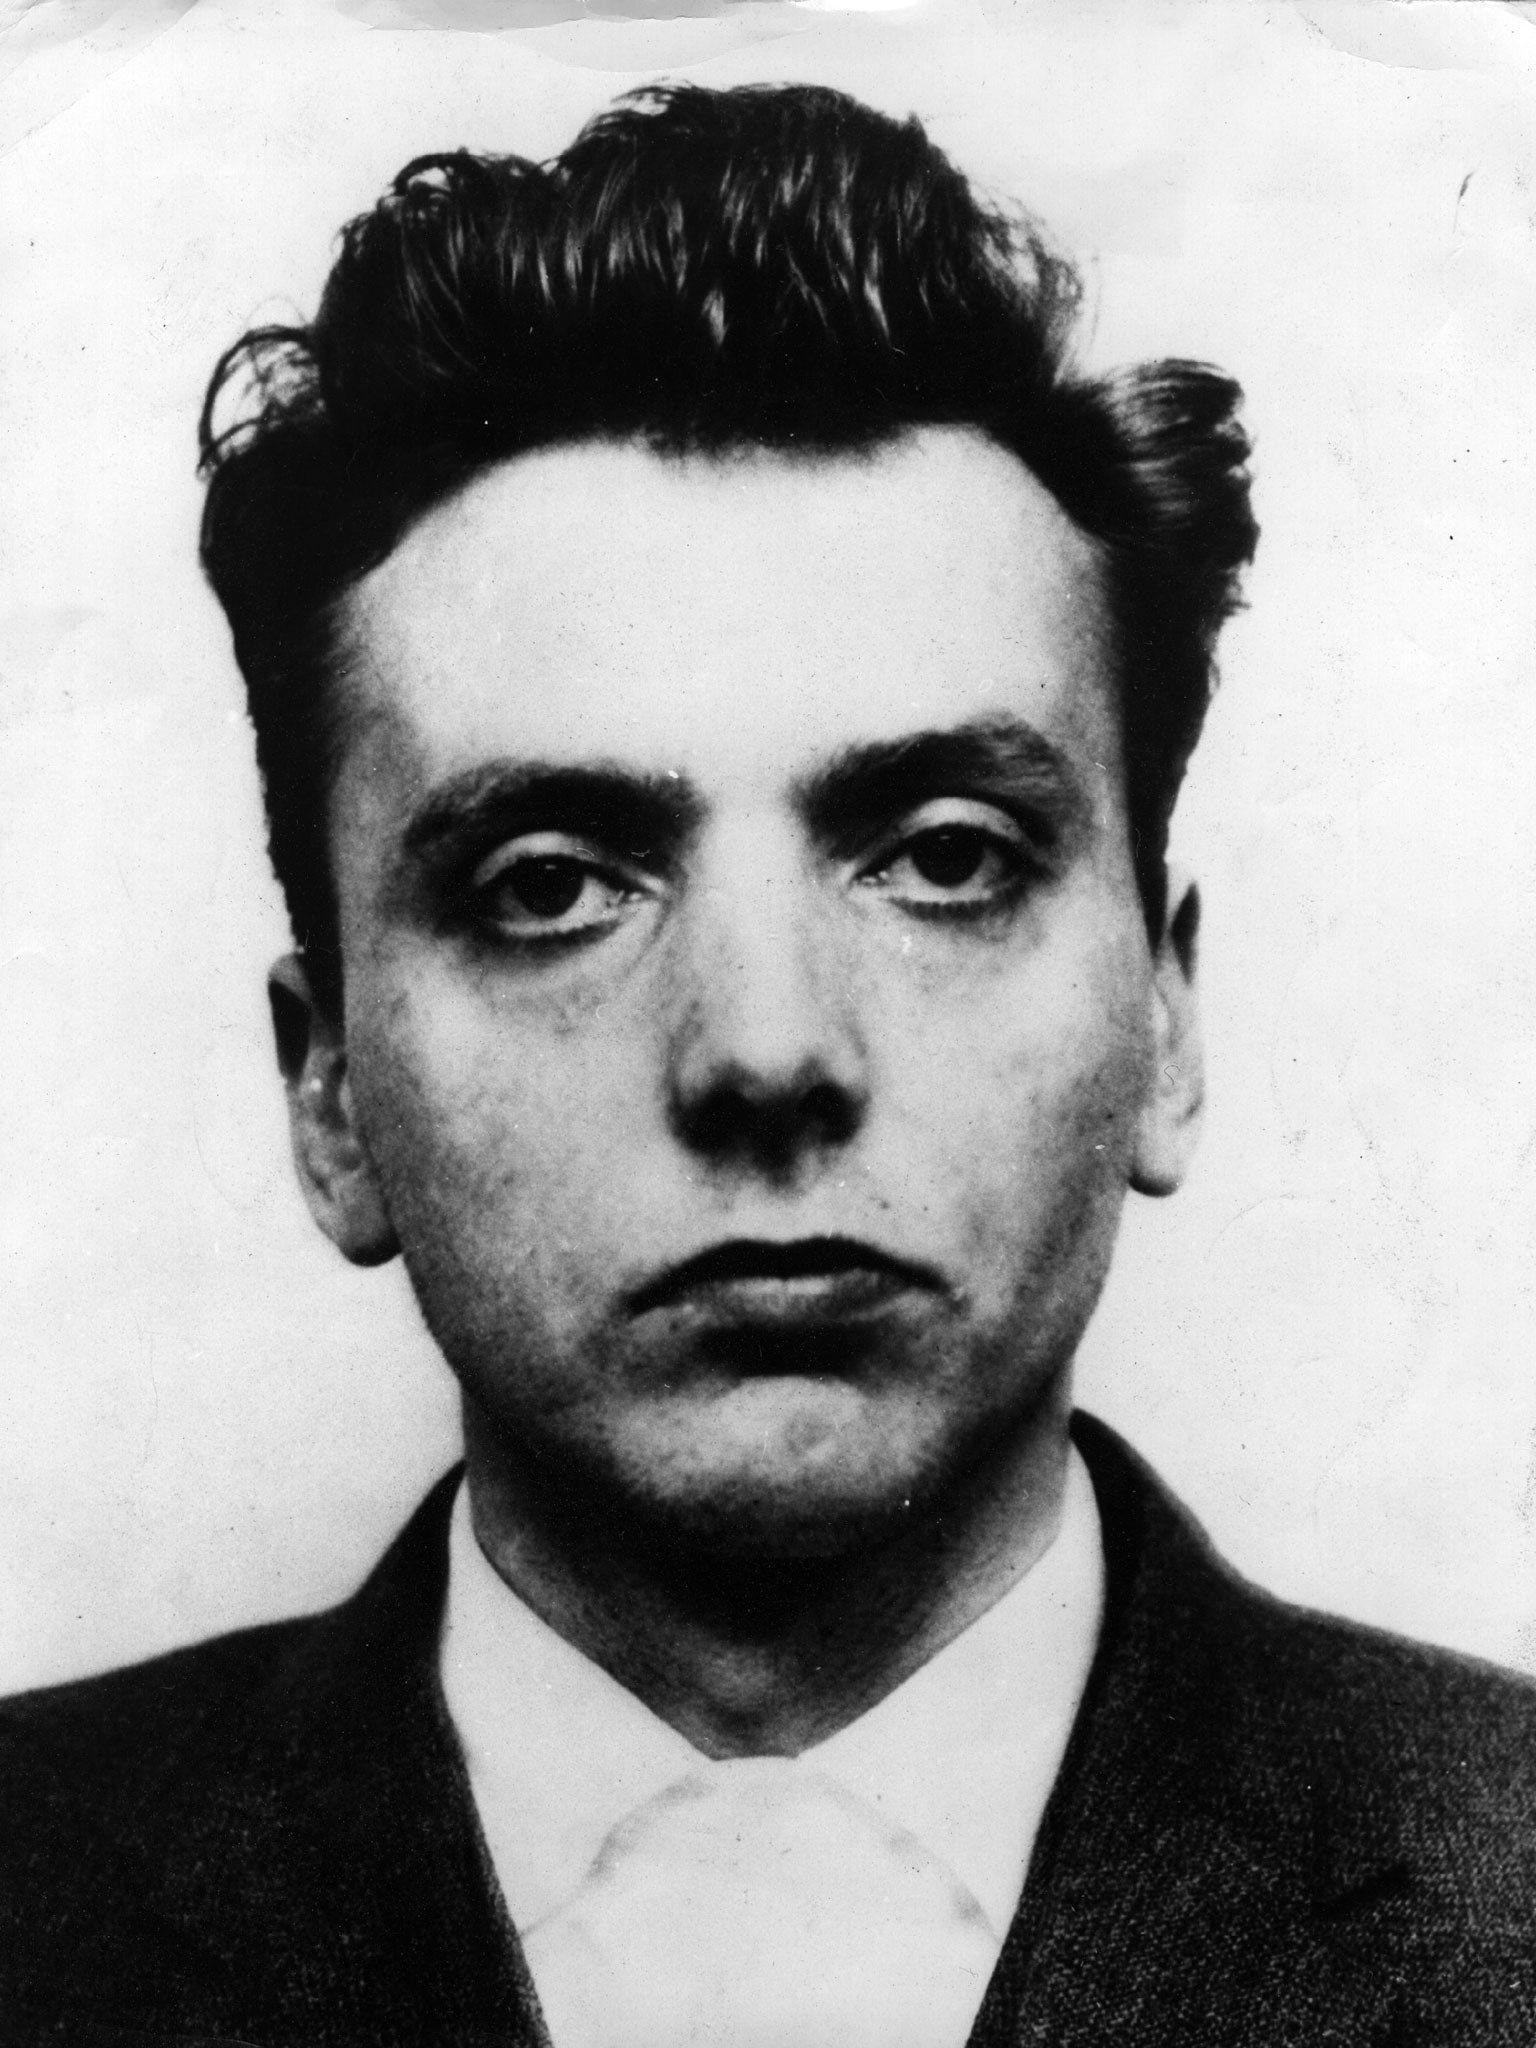 Letter from Ian Brady may have been his latest mind game